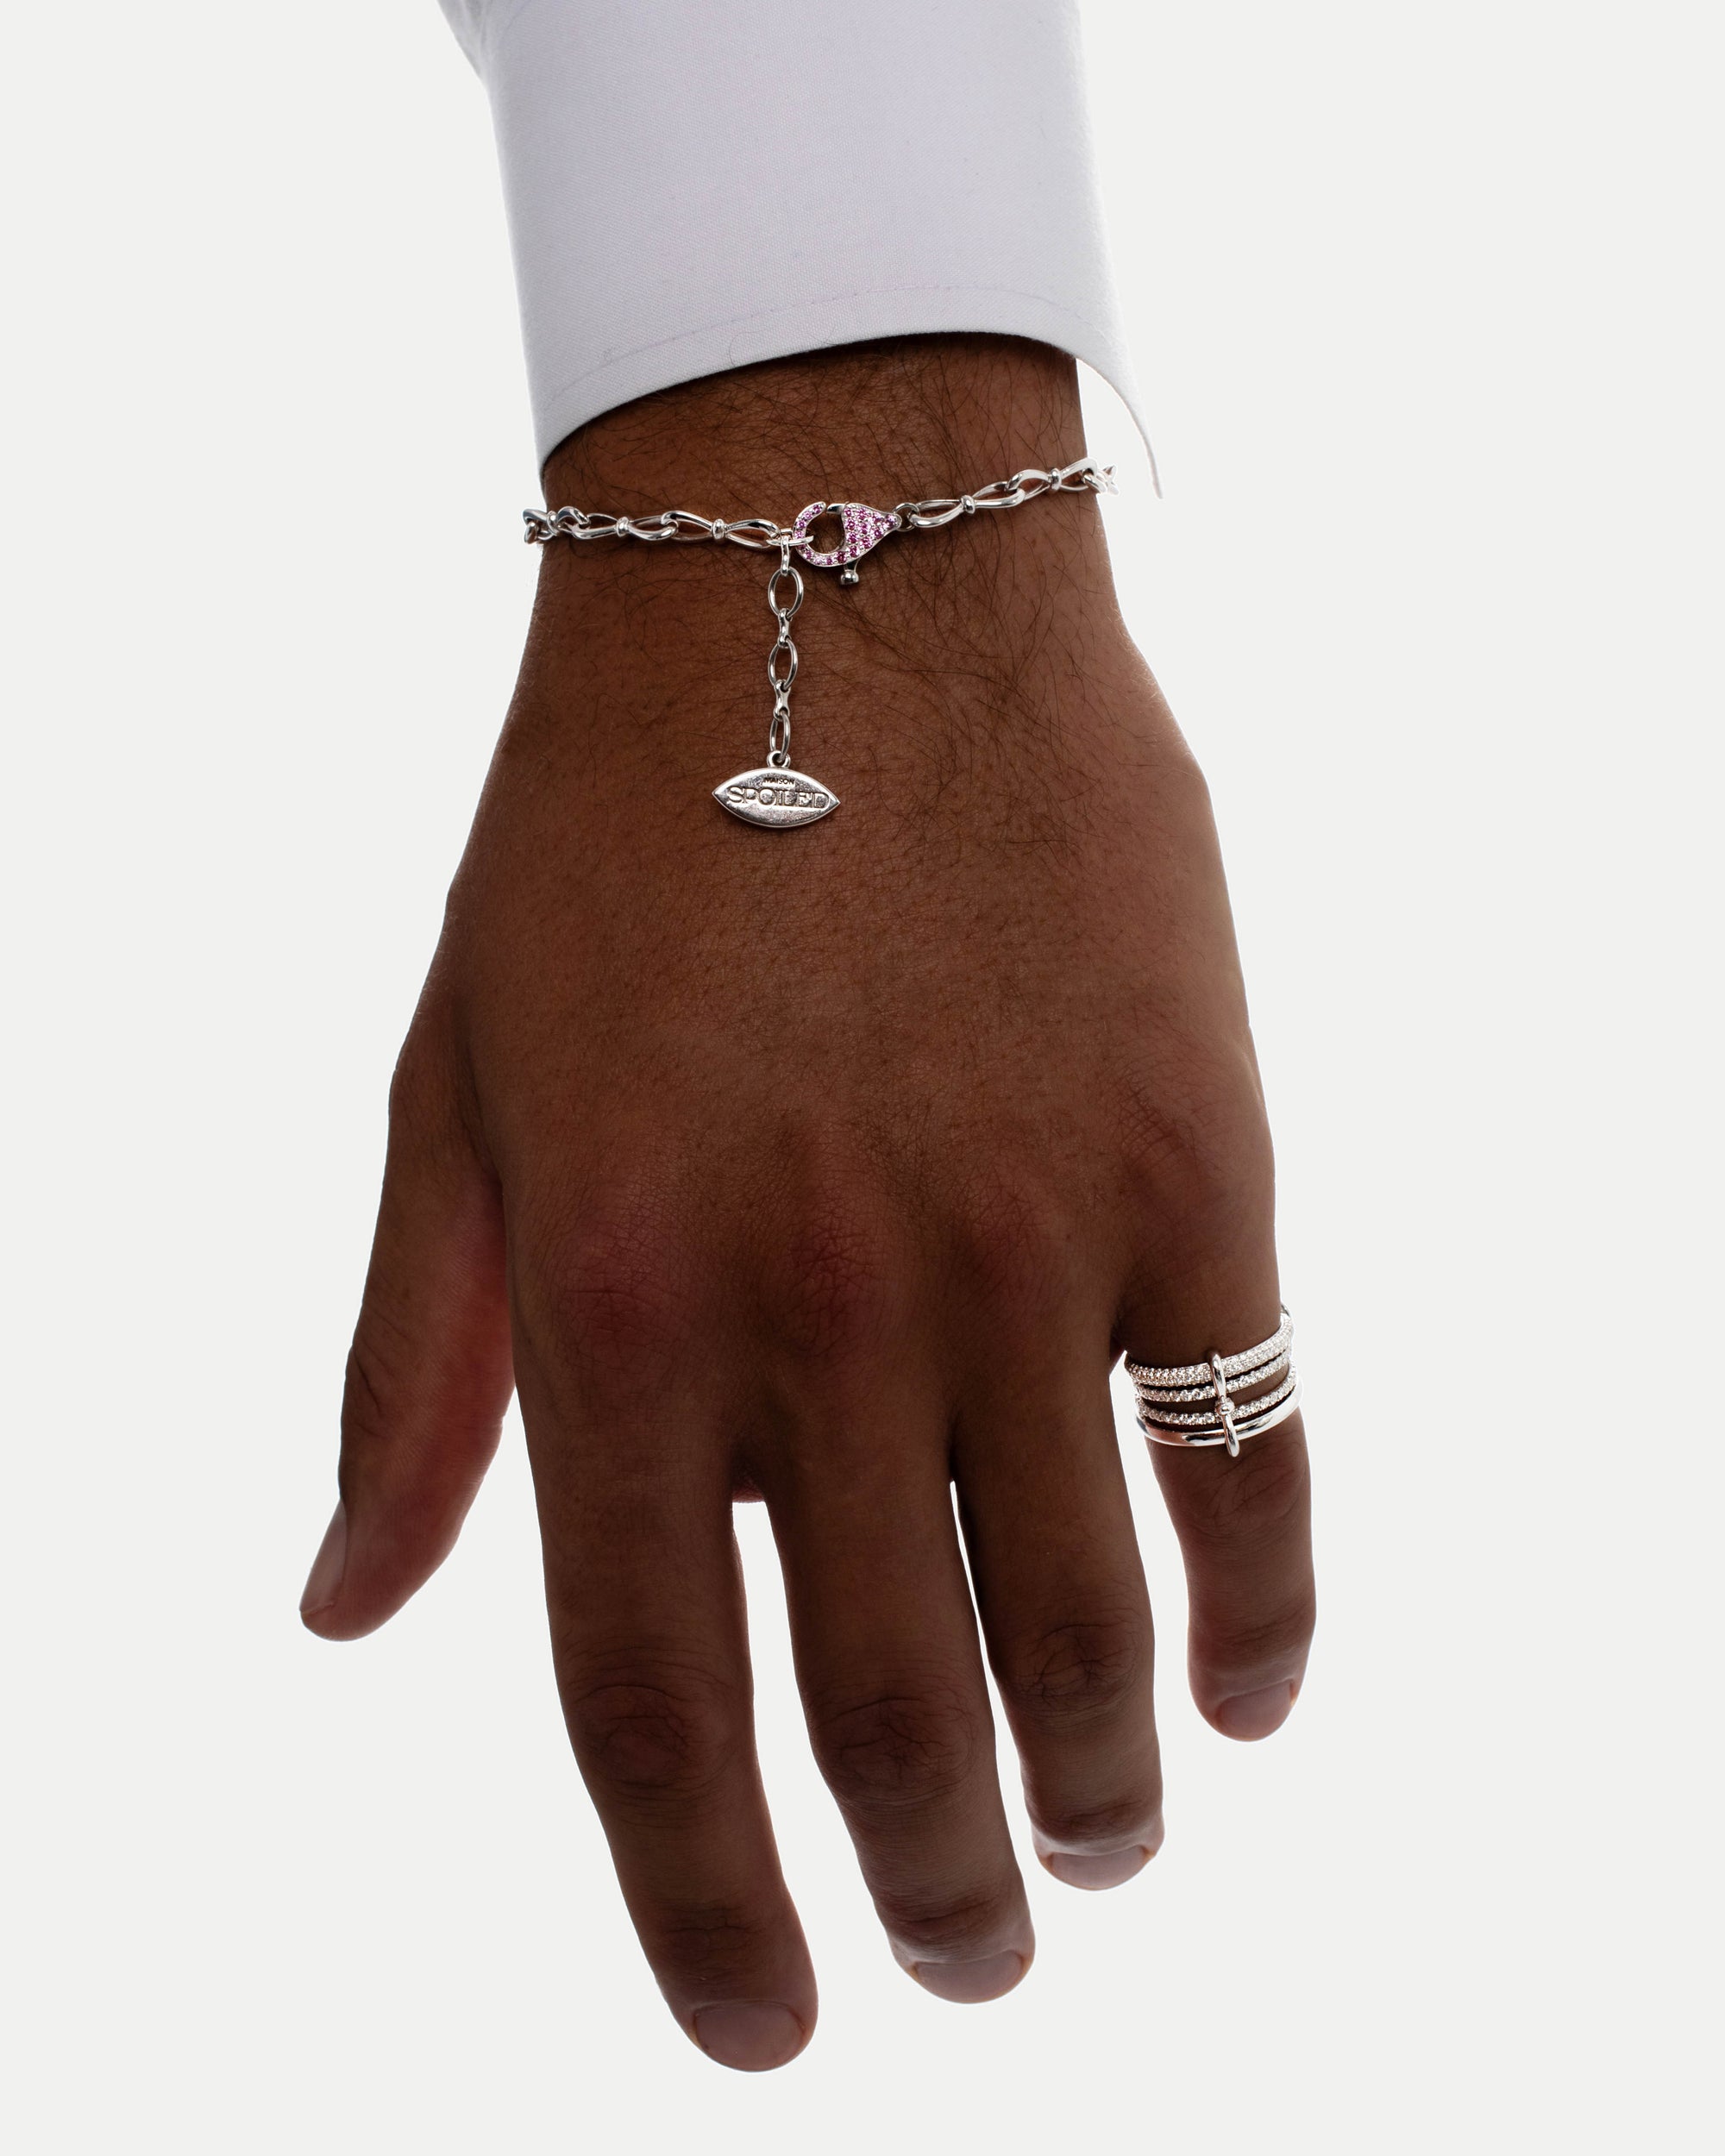 Together Forever Mini Infinity Link Ring in White Gold